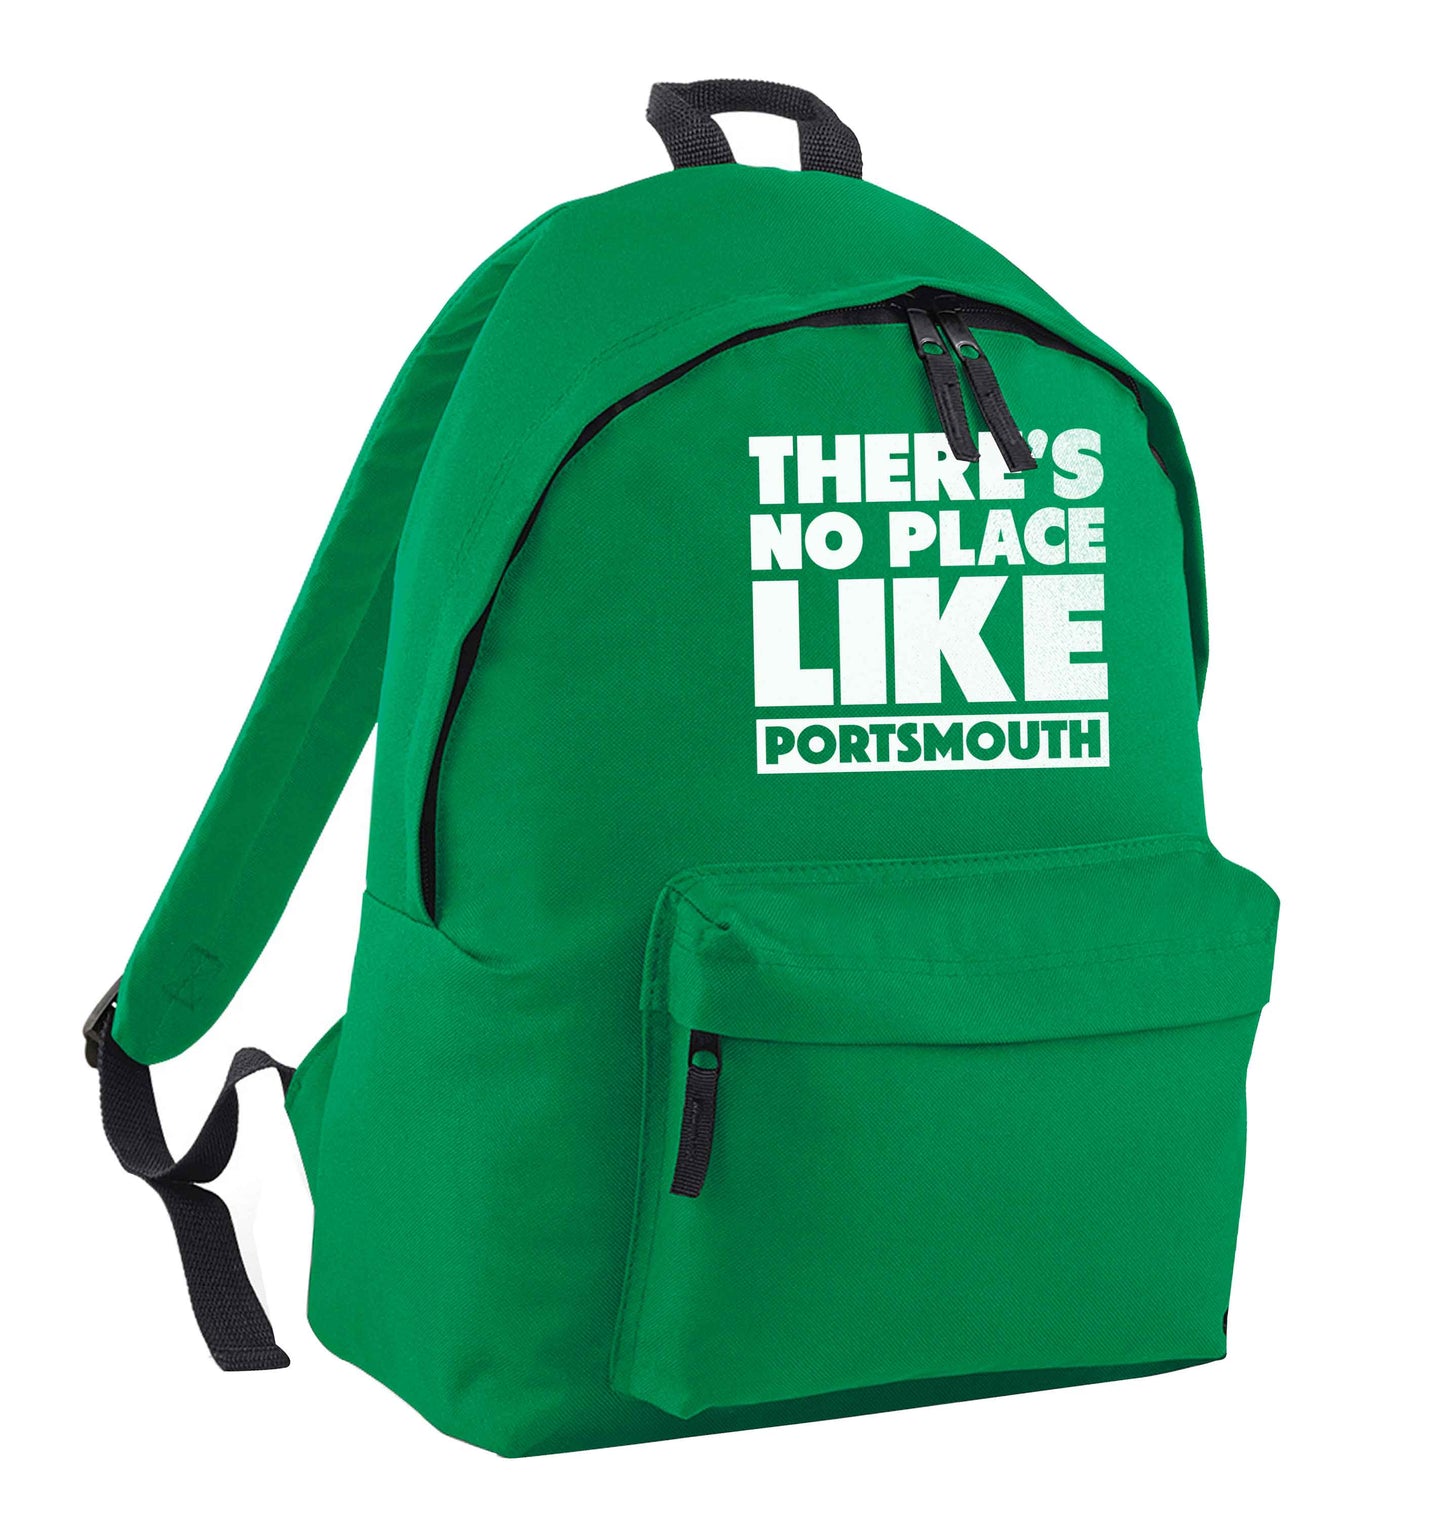 There's no place like Porstmouth green adults backpack